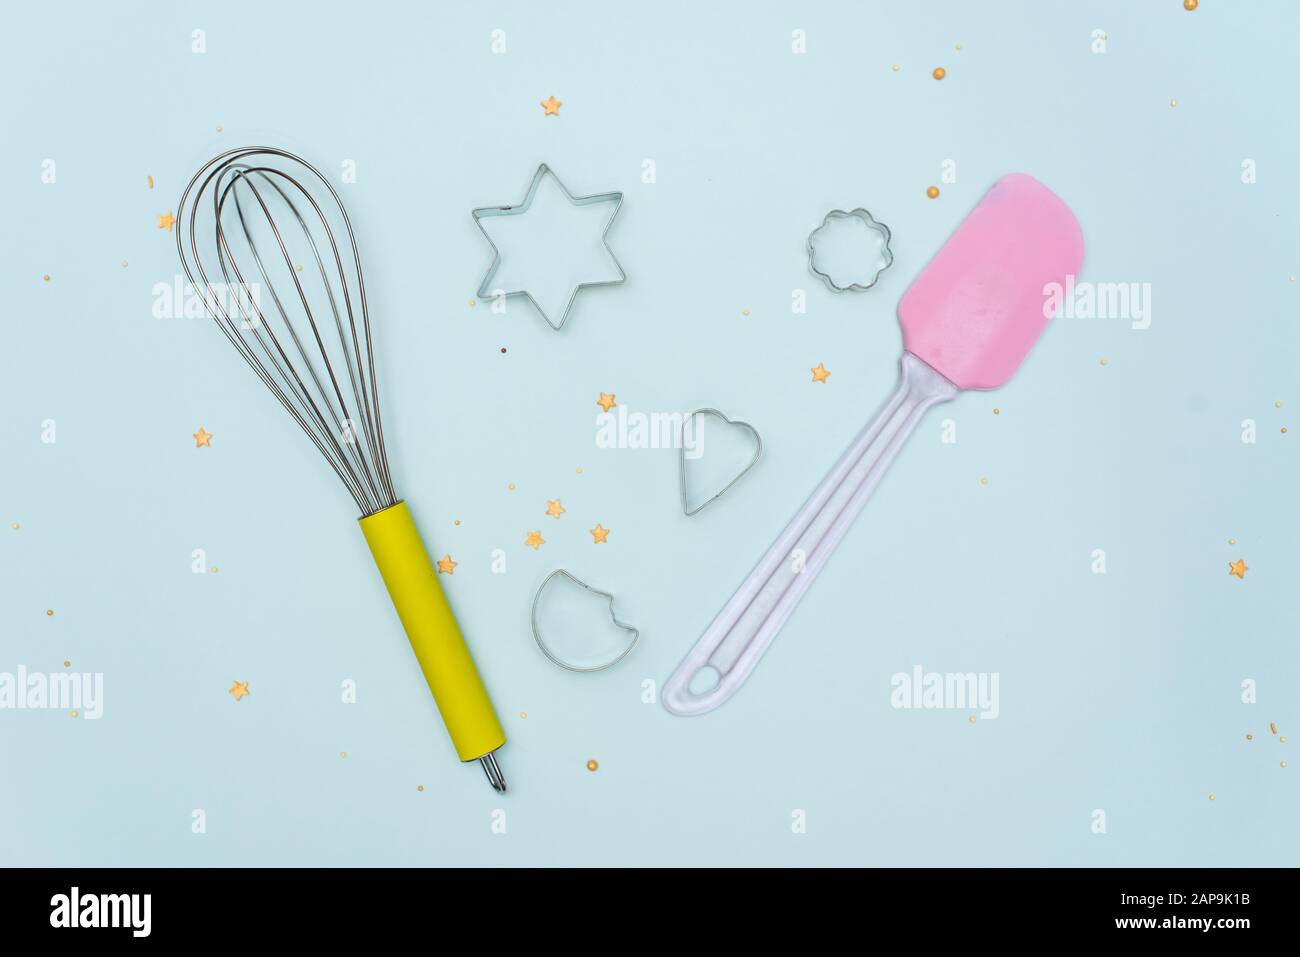 ingredients and tools to make a cake, flour, butter, sugar,eggs. Stock Photo